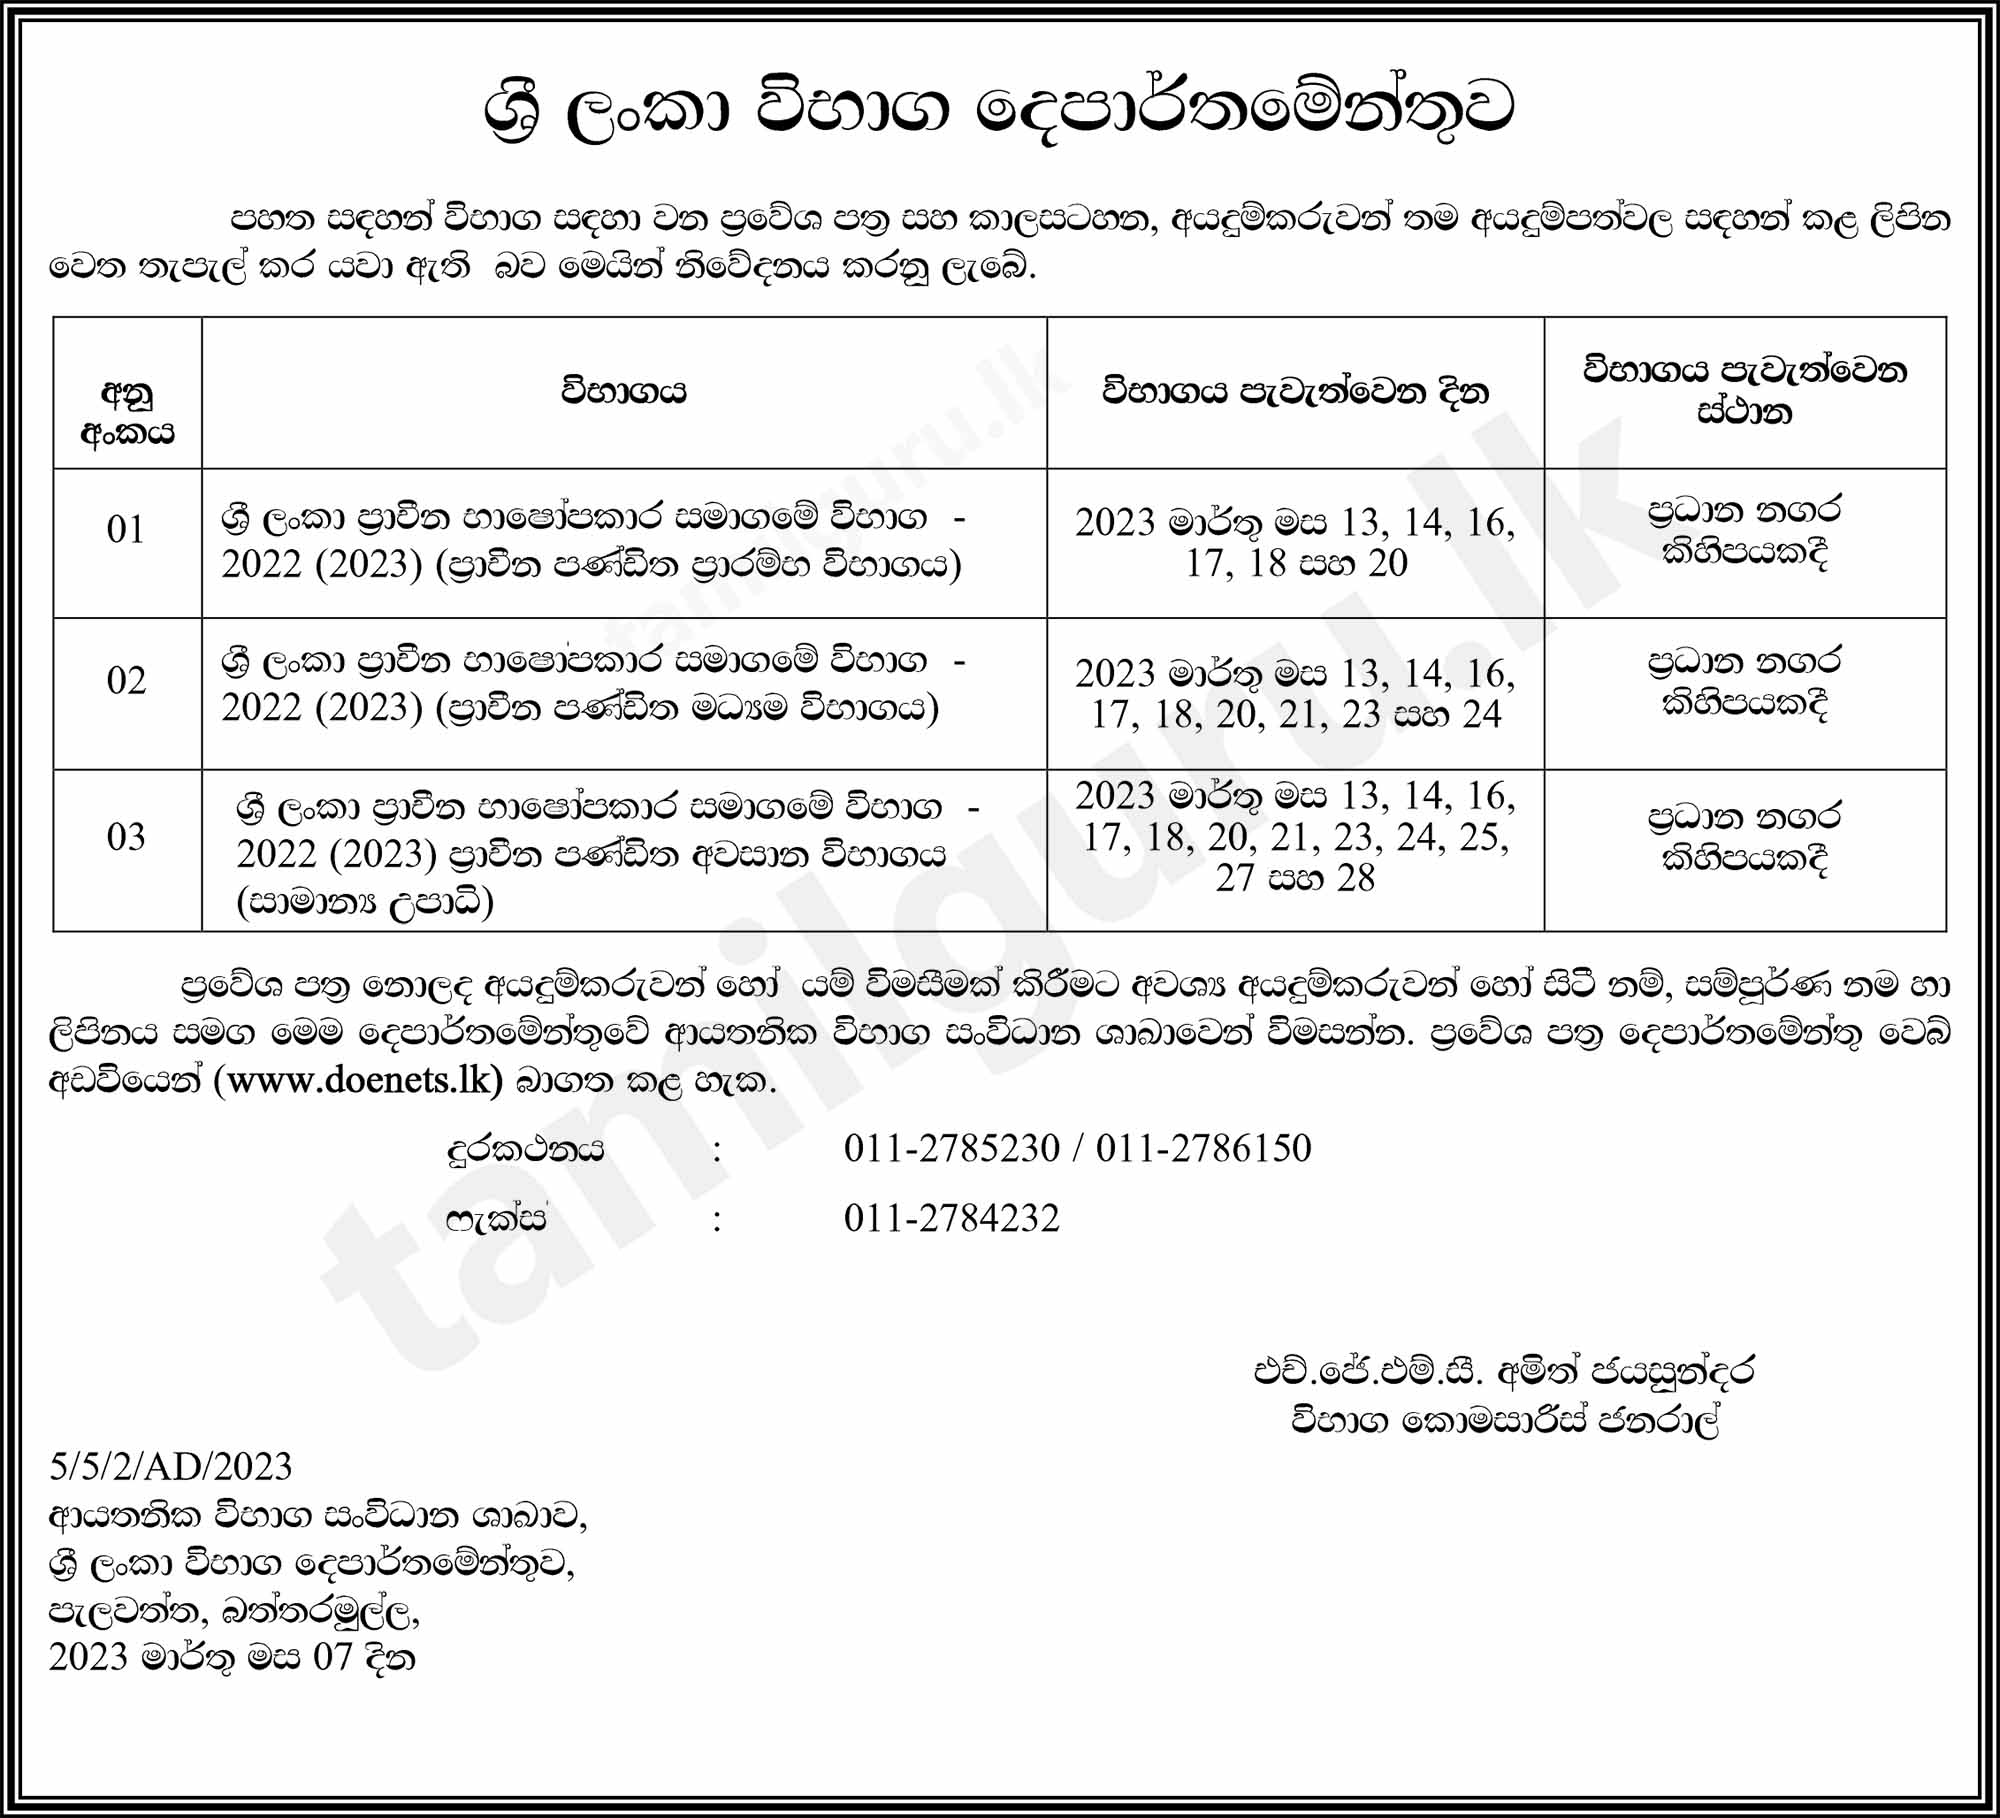 Admission Card Notice (Download) - Examinations of the Oriental Studies Society of Sri Lanka 2022 (2023) 